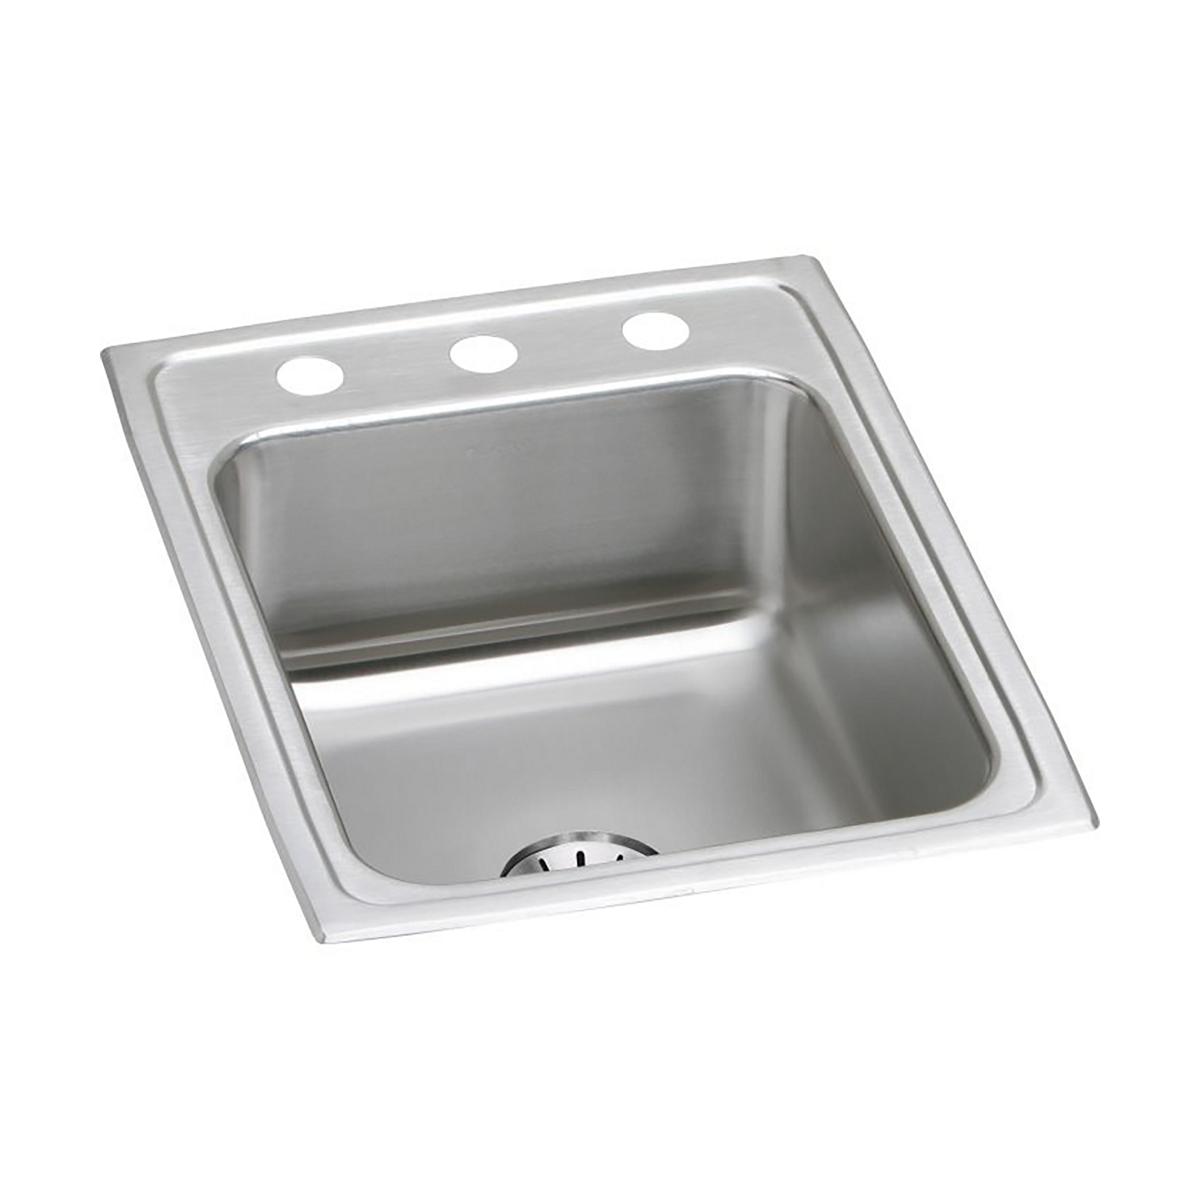 Elkay Lustertone Classic 17" x 22" x 7-5/8" Single Bowl Drop-in Sink with Perfect Drain